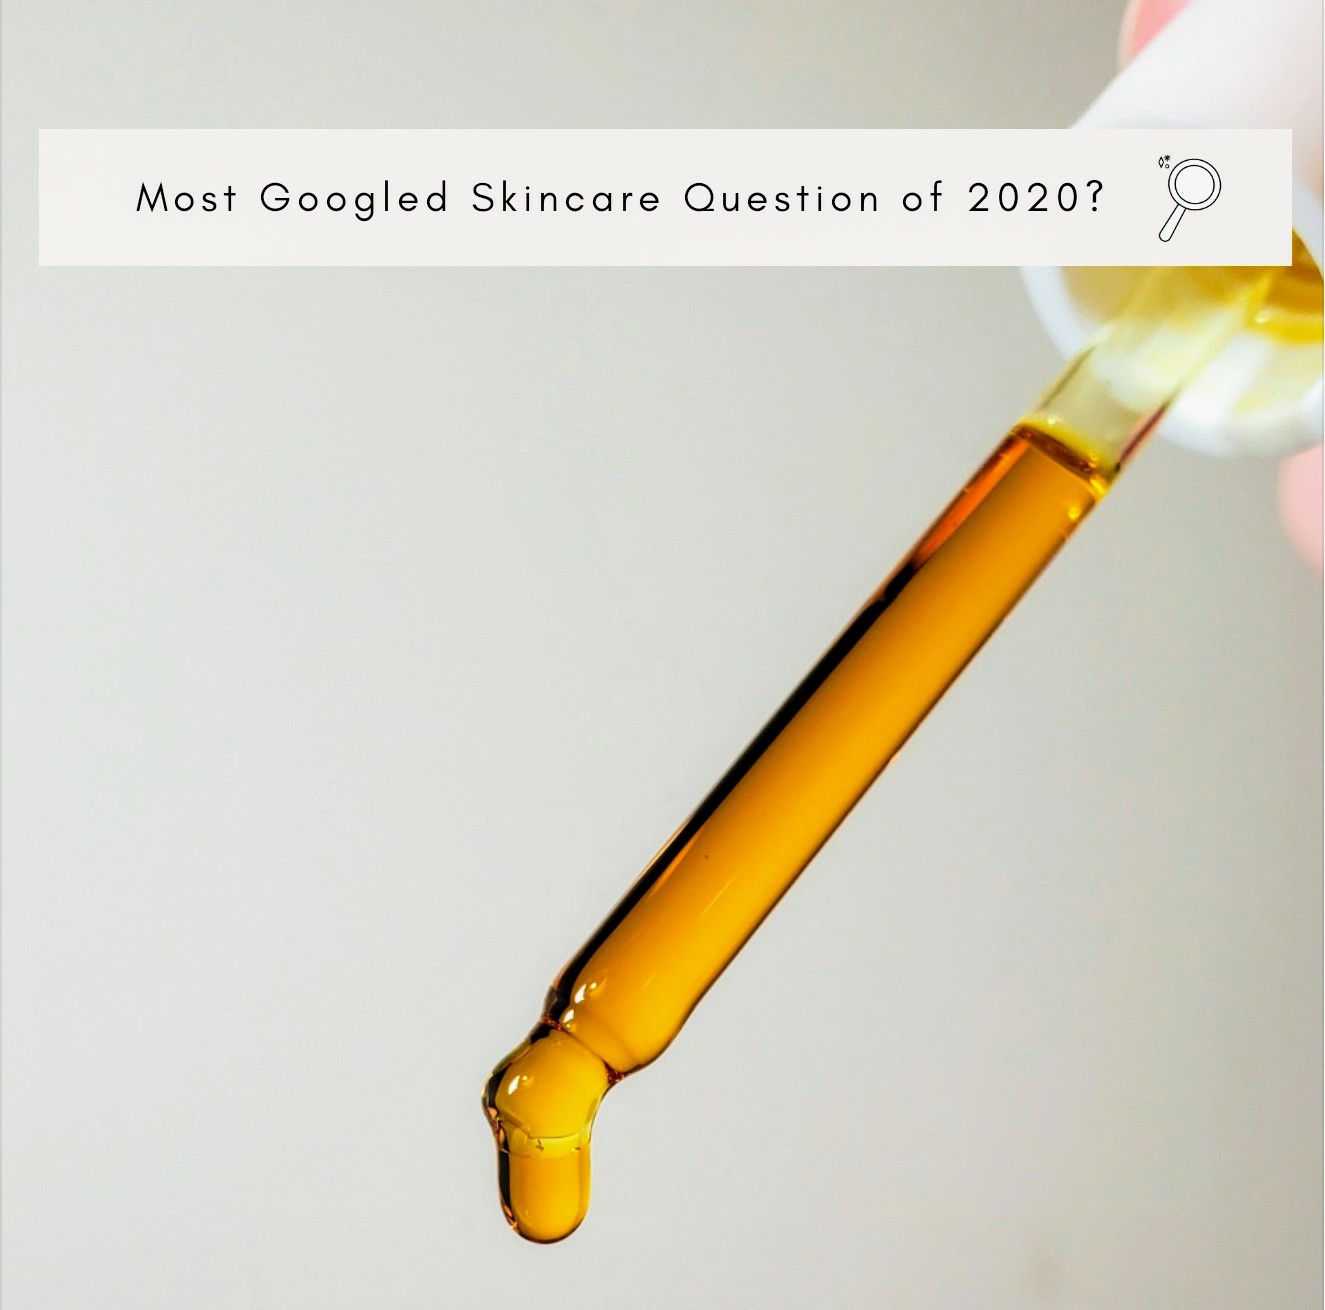 The Most Searched Skincare Question of 2020